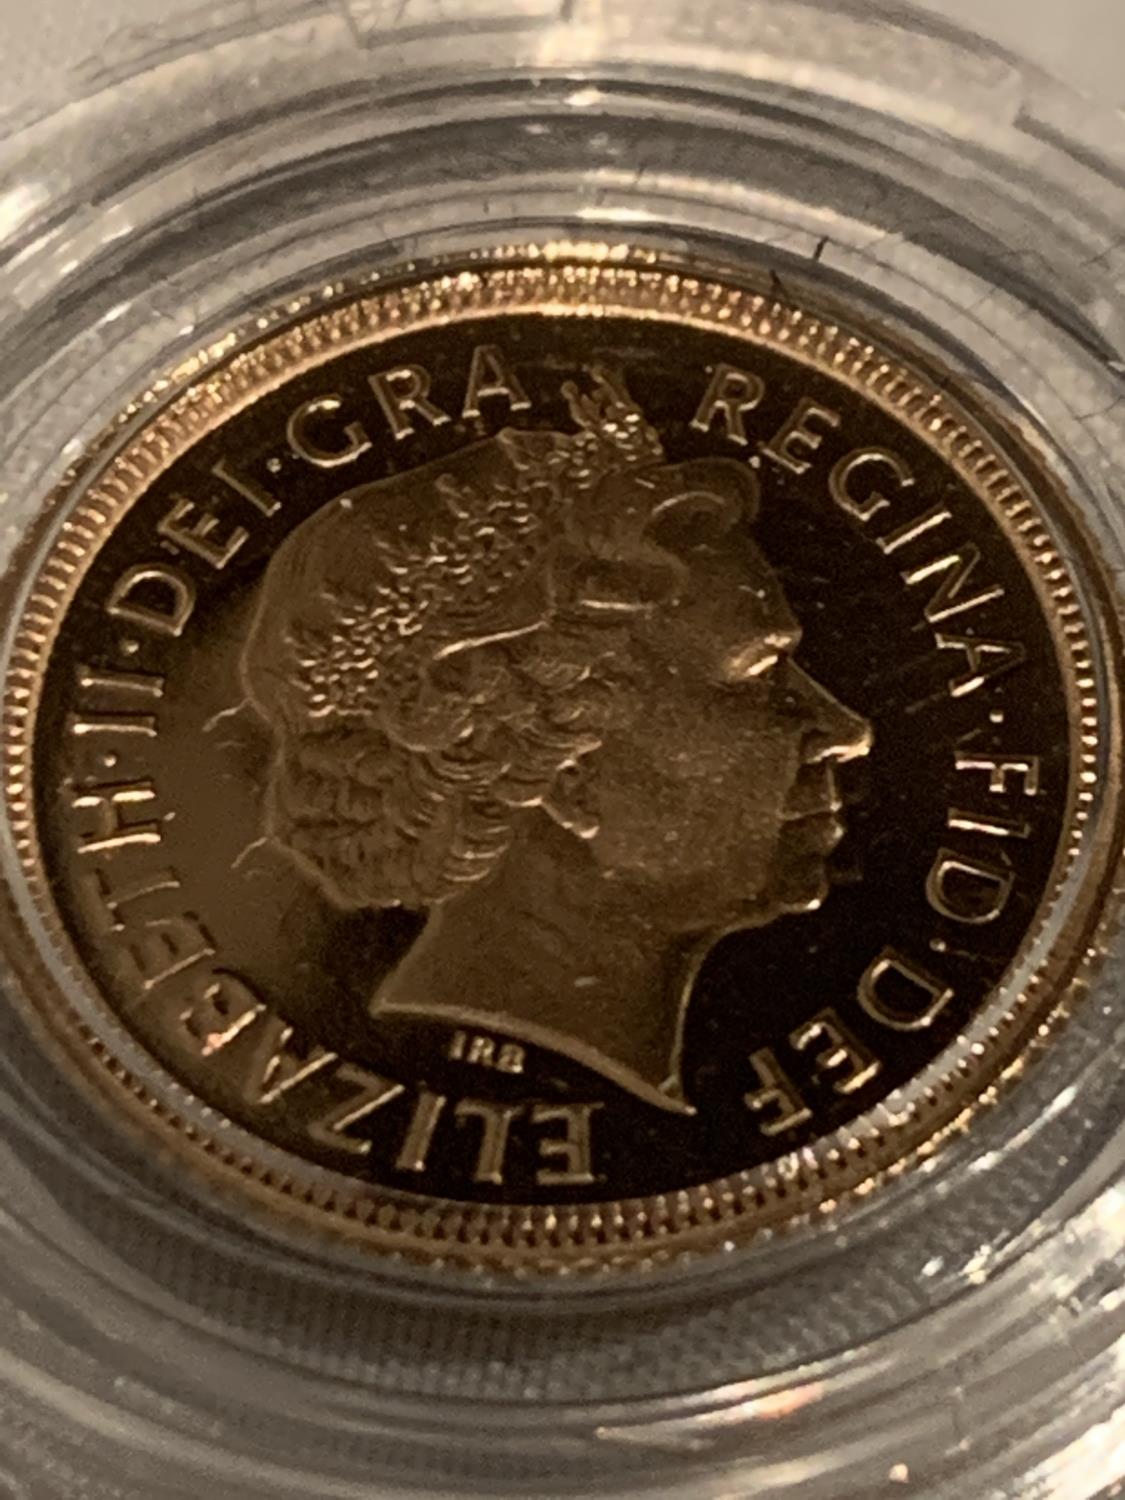 A 1998 GOLD PROOF HALF SOVEREIGN IN PRESENTATION CASE WITH CERTIFICATE - Image 3 of 3